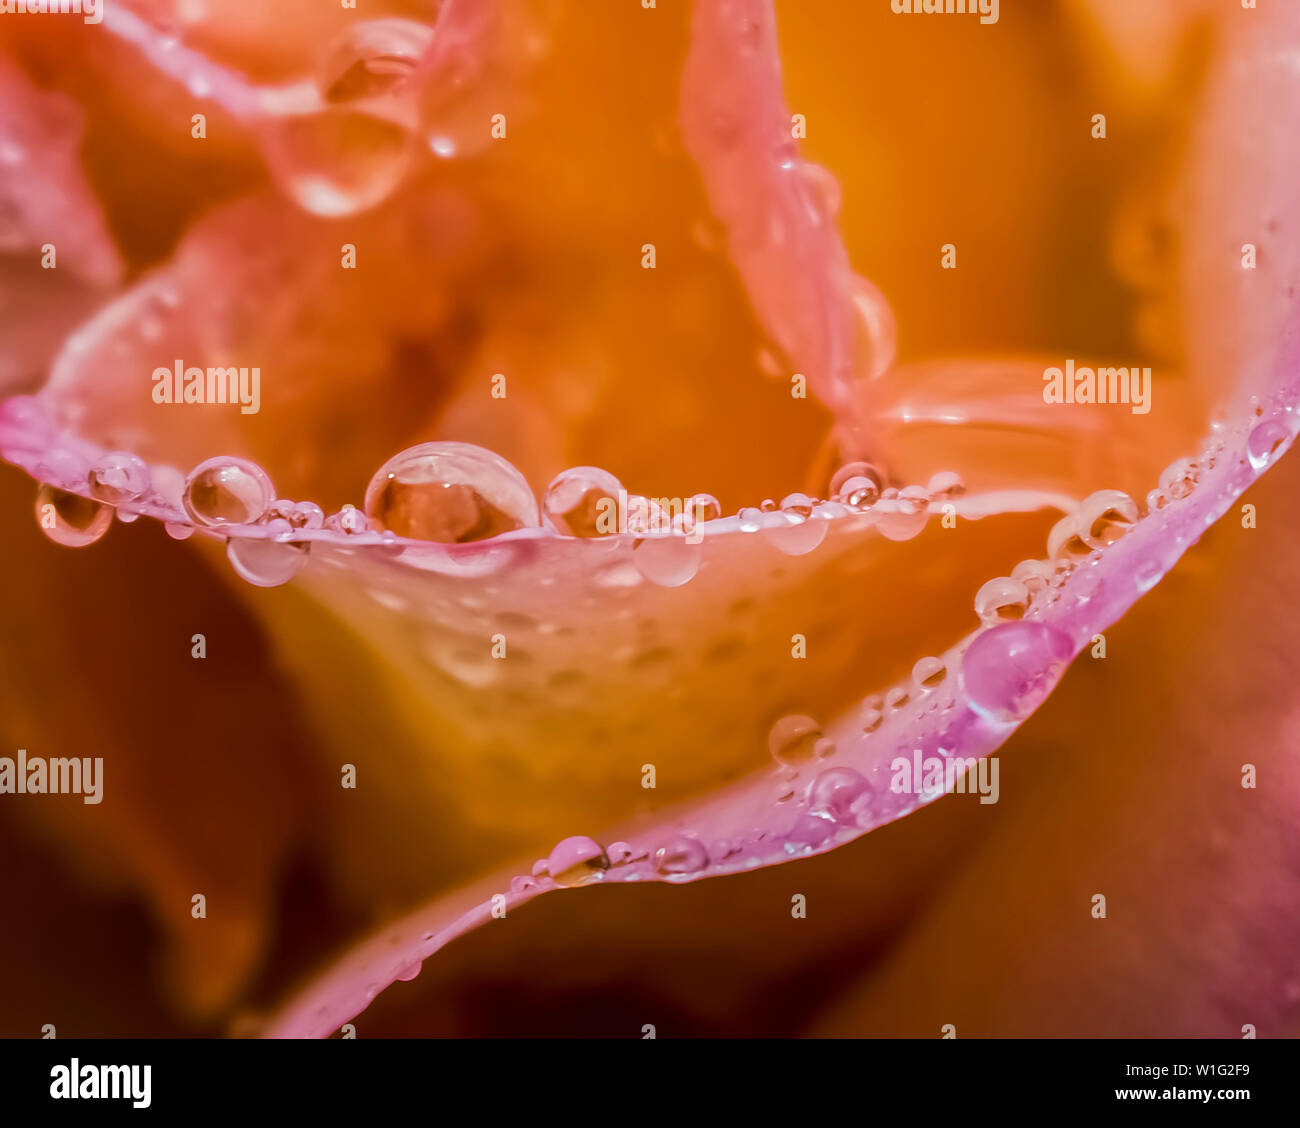 Raindrops on close up edges of rose petals in orange, pink, yellow colors Stock Photo